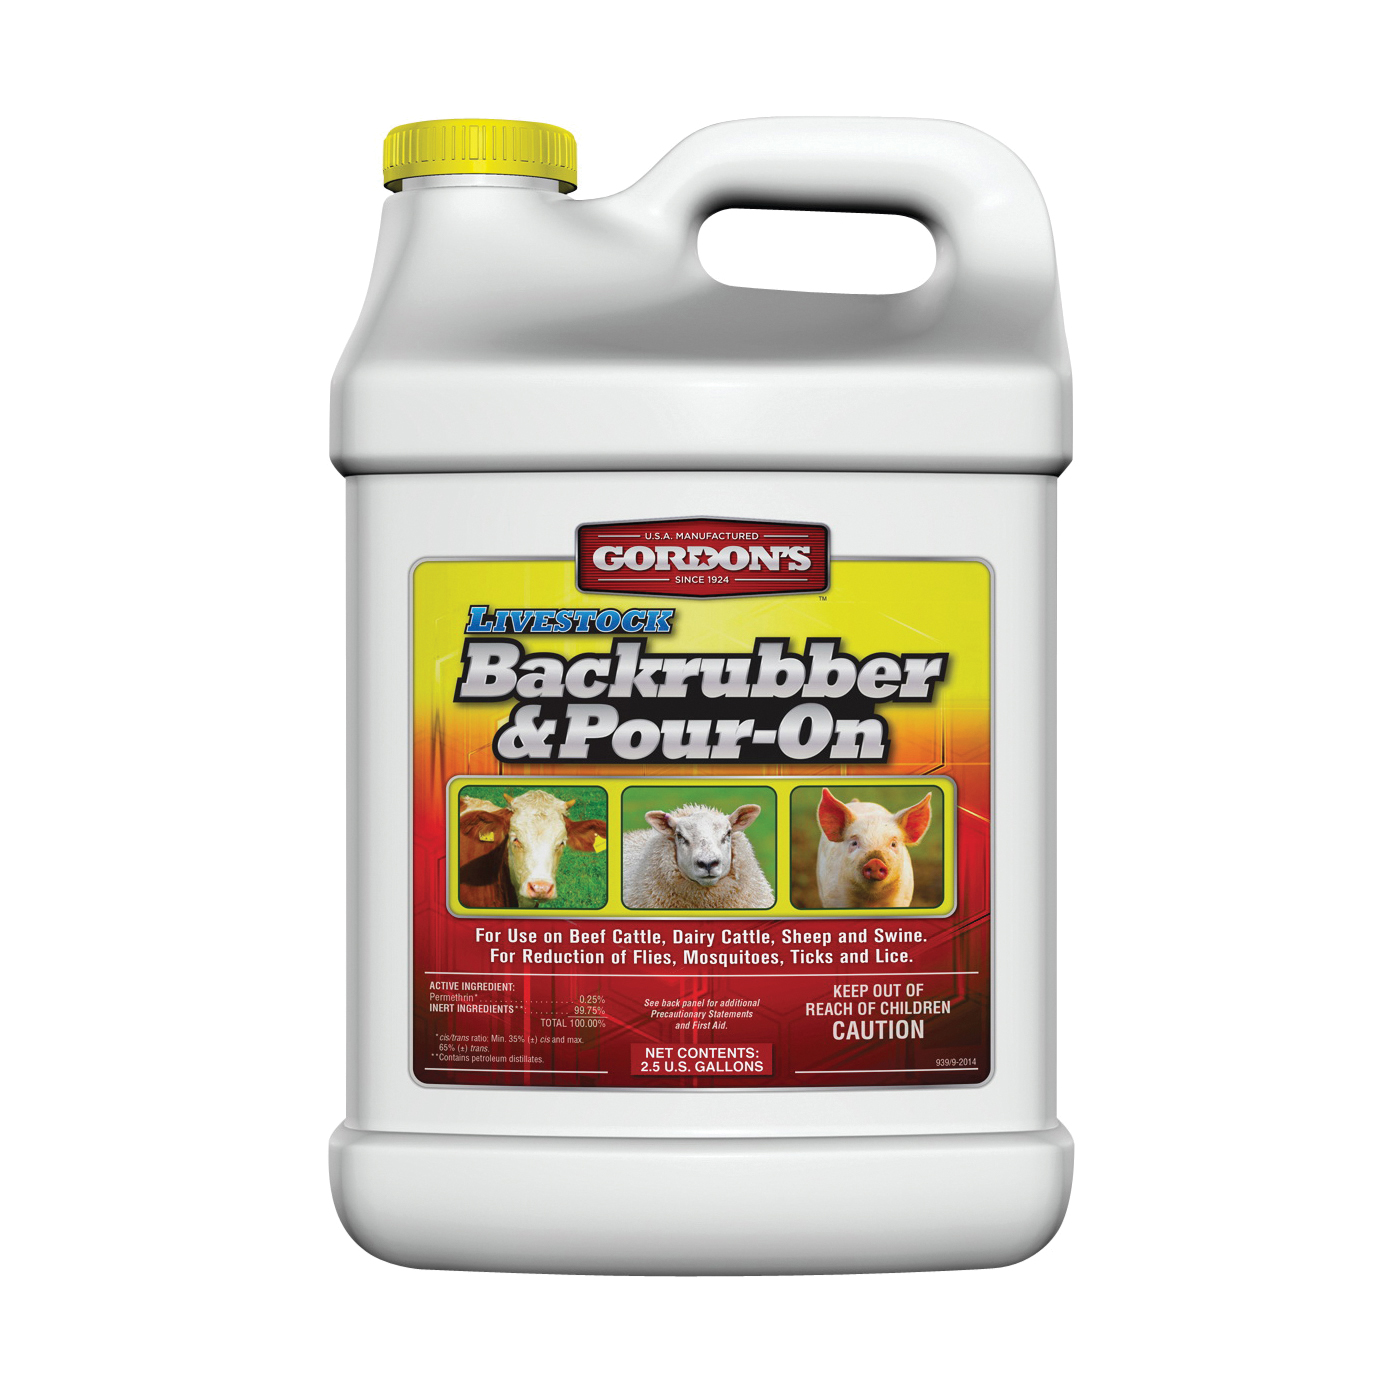 9391122 Backrubber and Pour-On Insecticide, Liquid, Light Yellow, Petrol, 2.5 gal